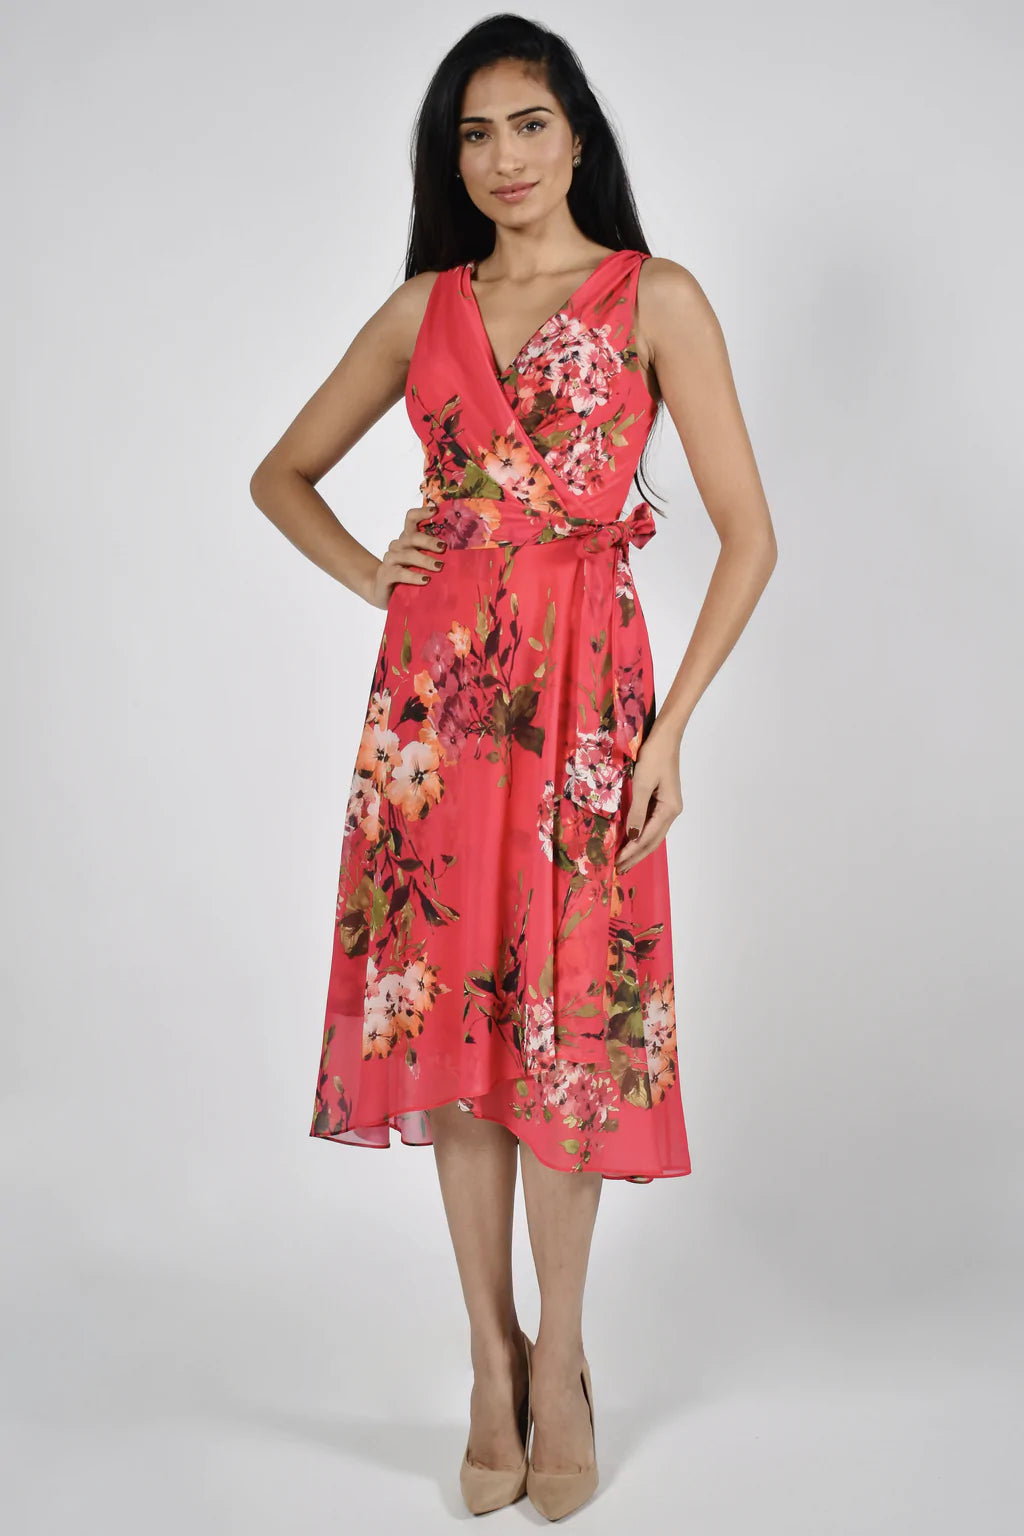 Red & Green Print Georgette Dress 221579 - After Hours Boutique